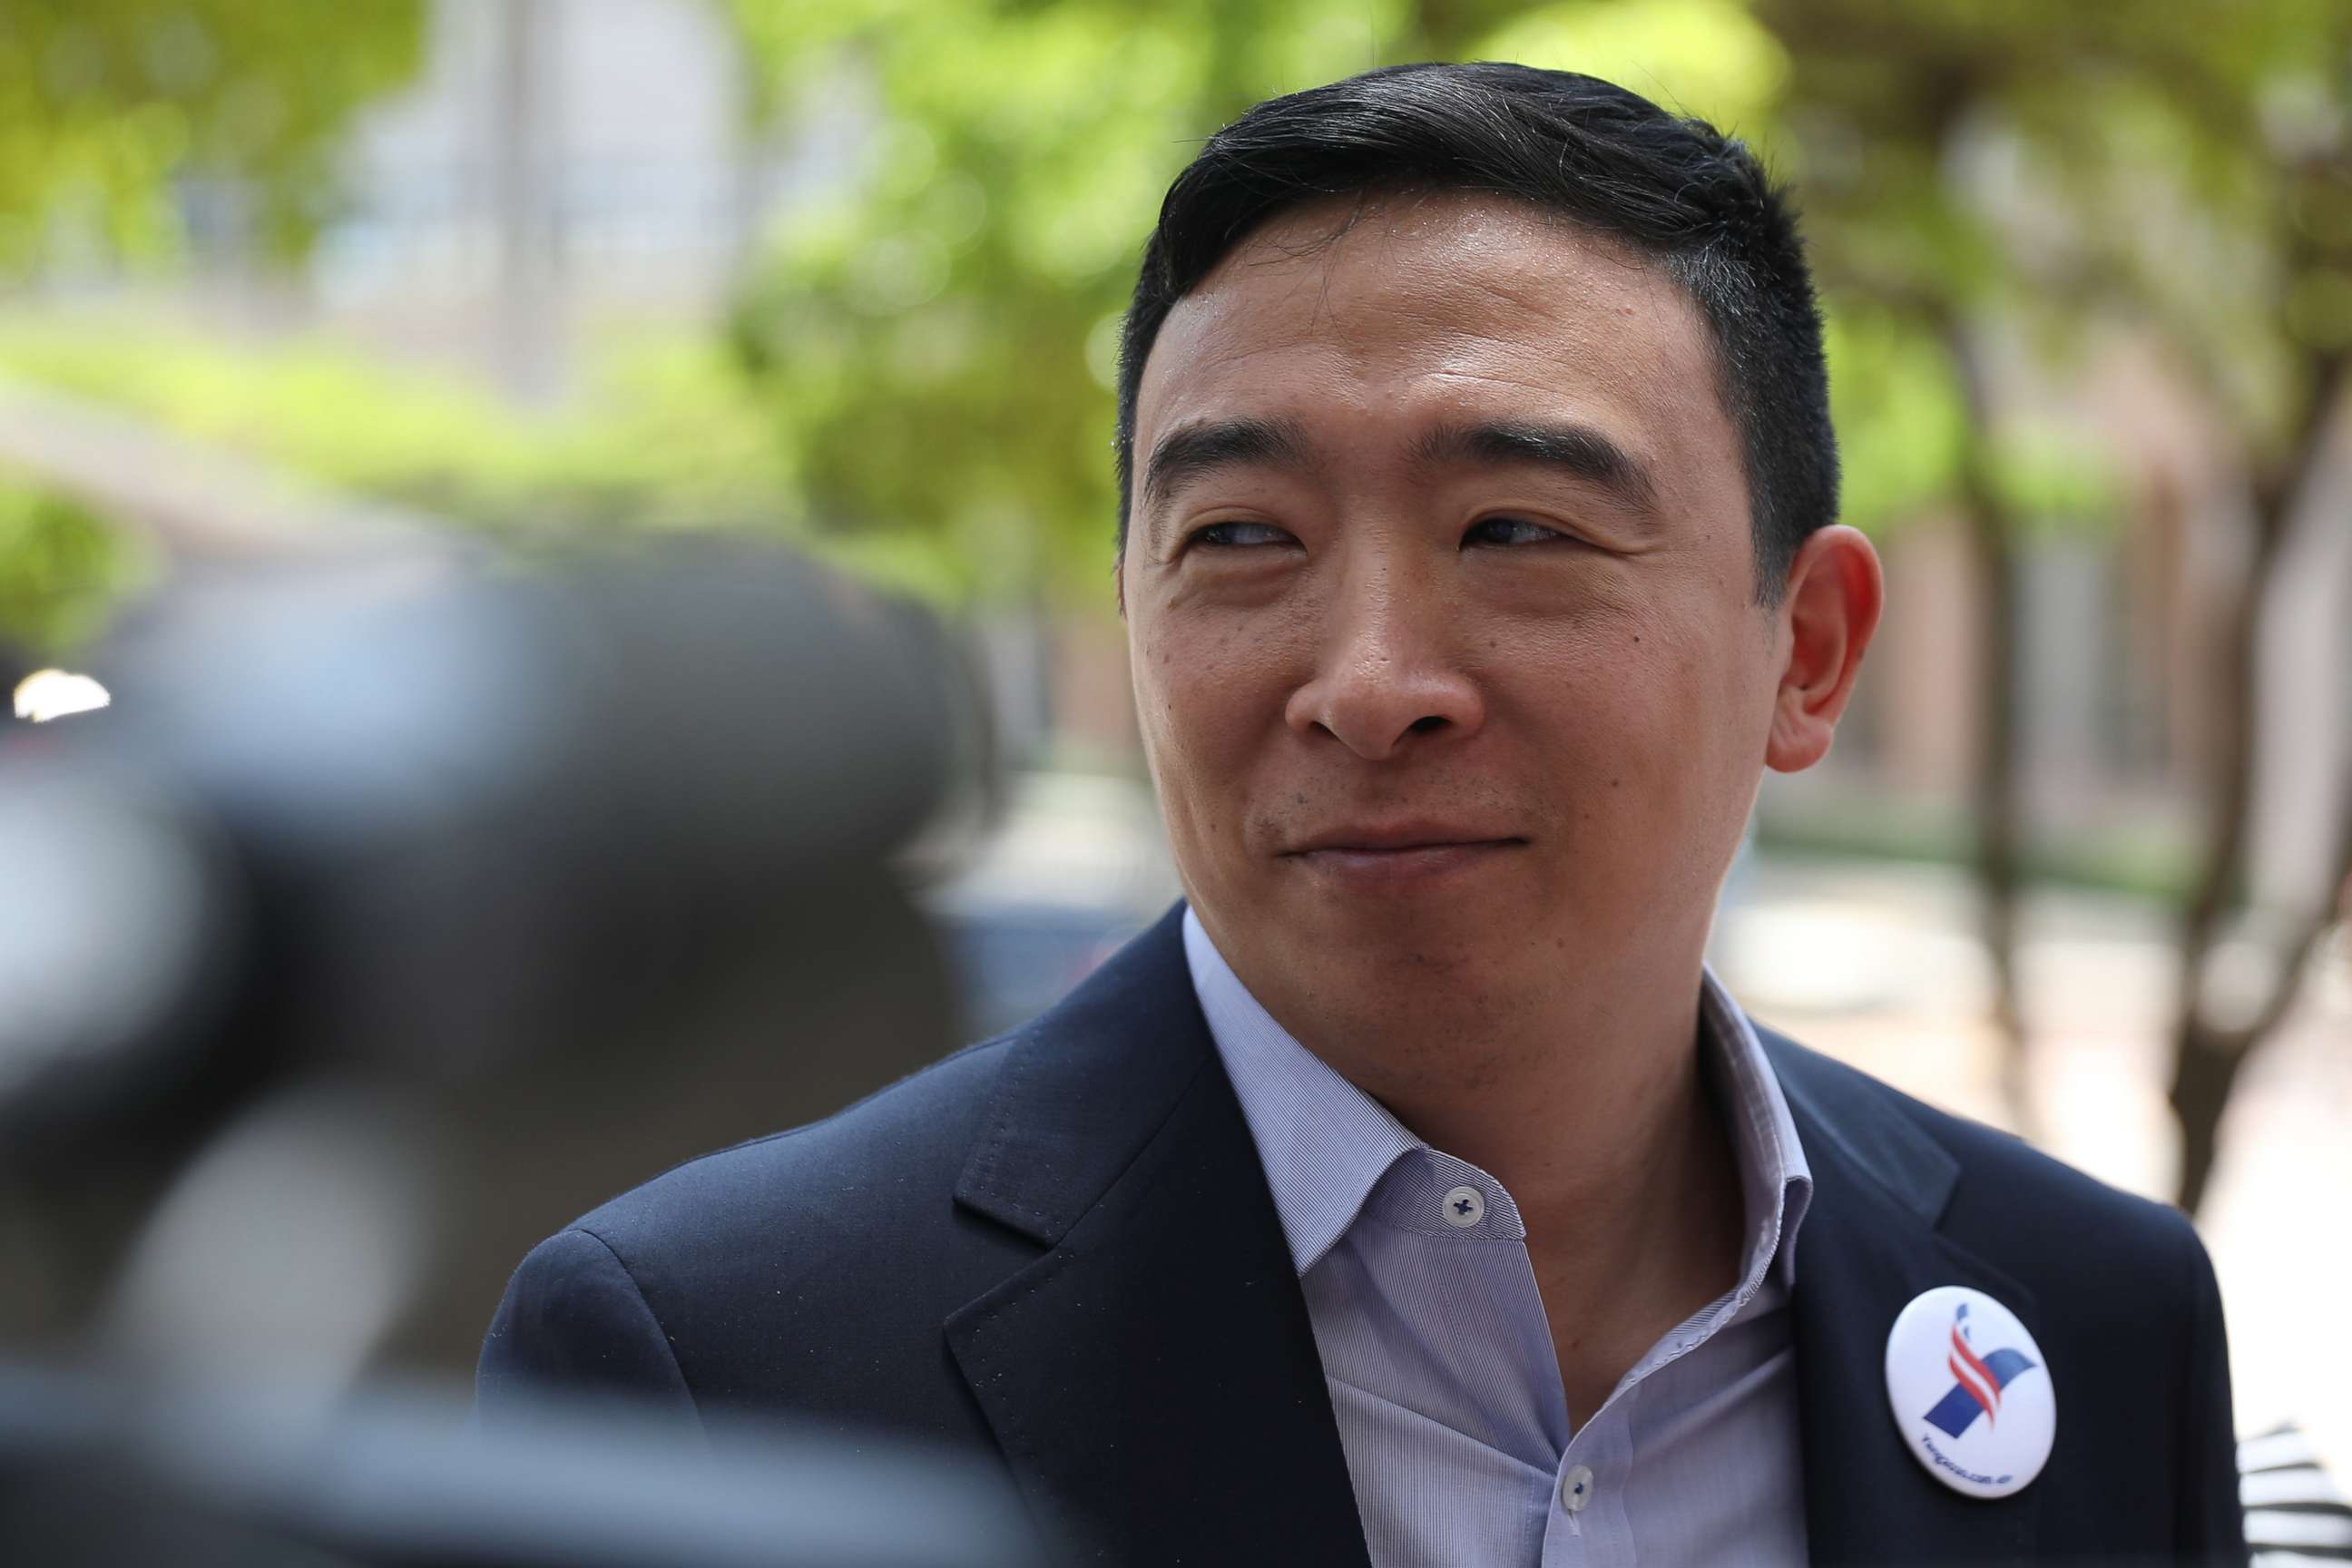 PHOTO: Democratic presidential candidate Andrew Yang speaks to media outside the Knight Concert Hall of the Adrienne Arsht Center for the Performing Arts of Miami-Dade County June 26, 2019, in Miami.